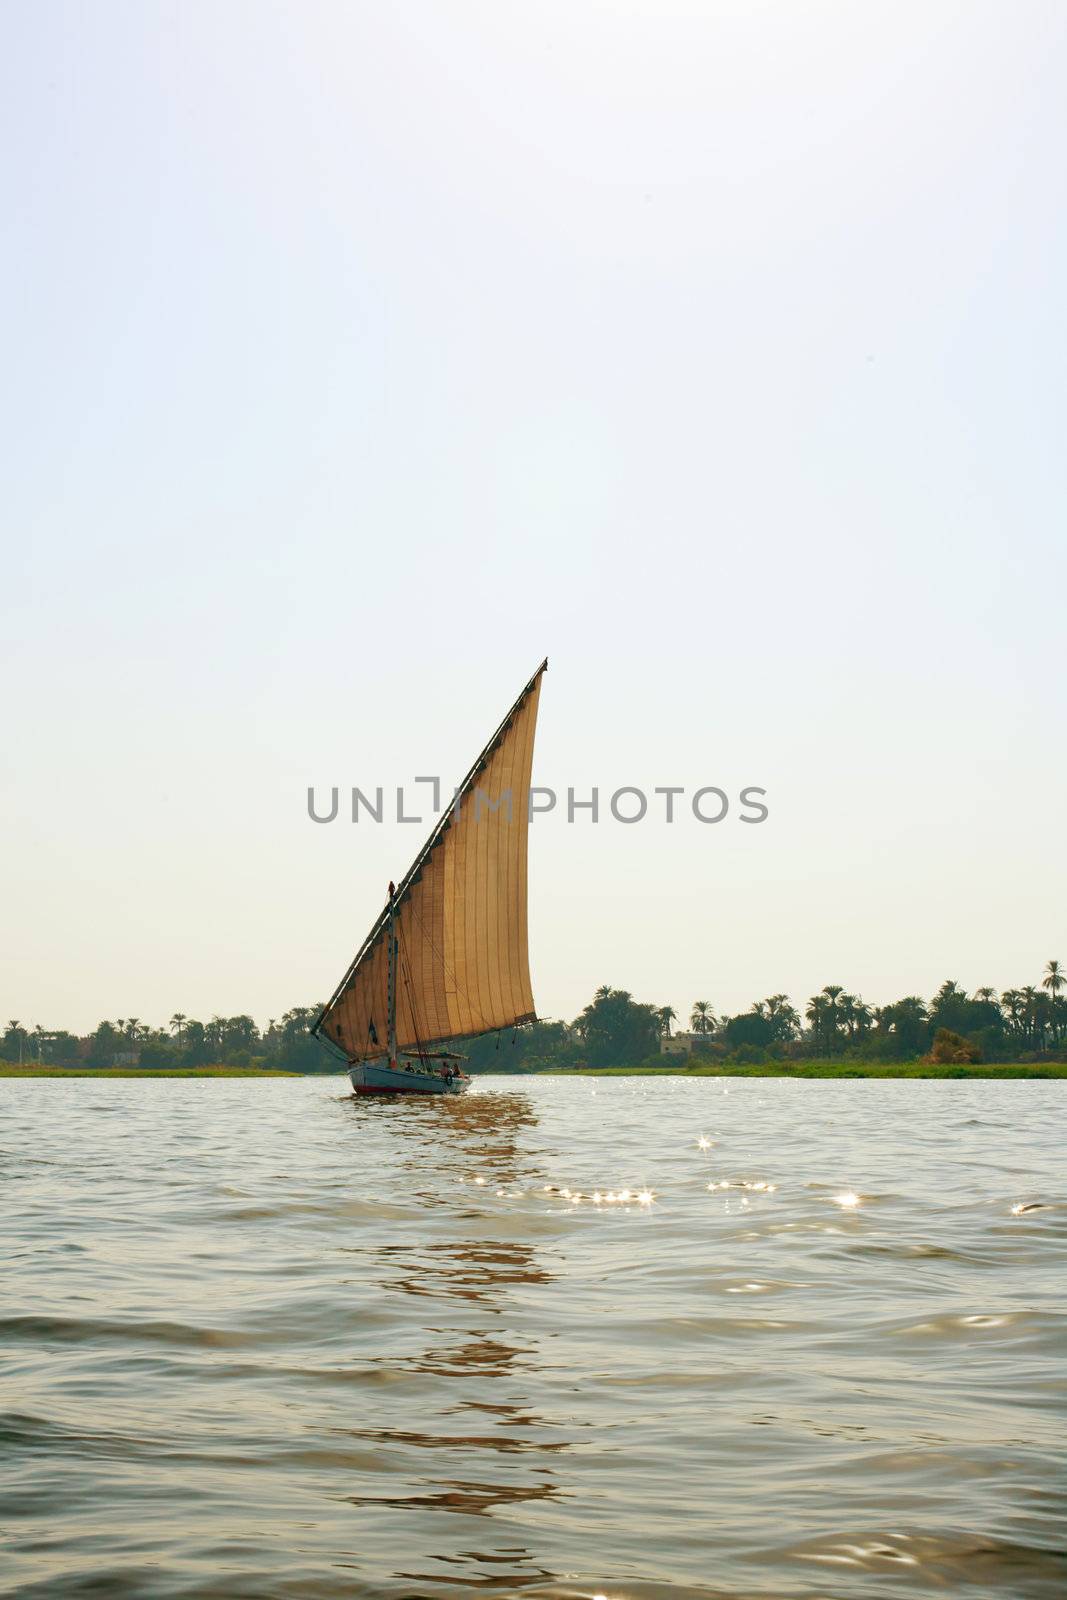 Faluka on the Nile river by imarin